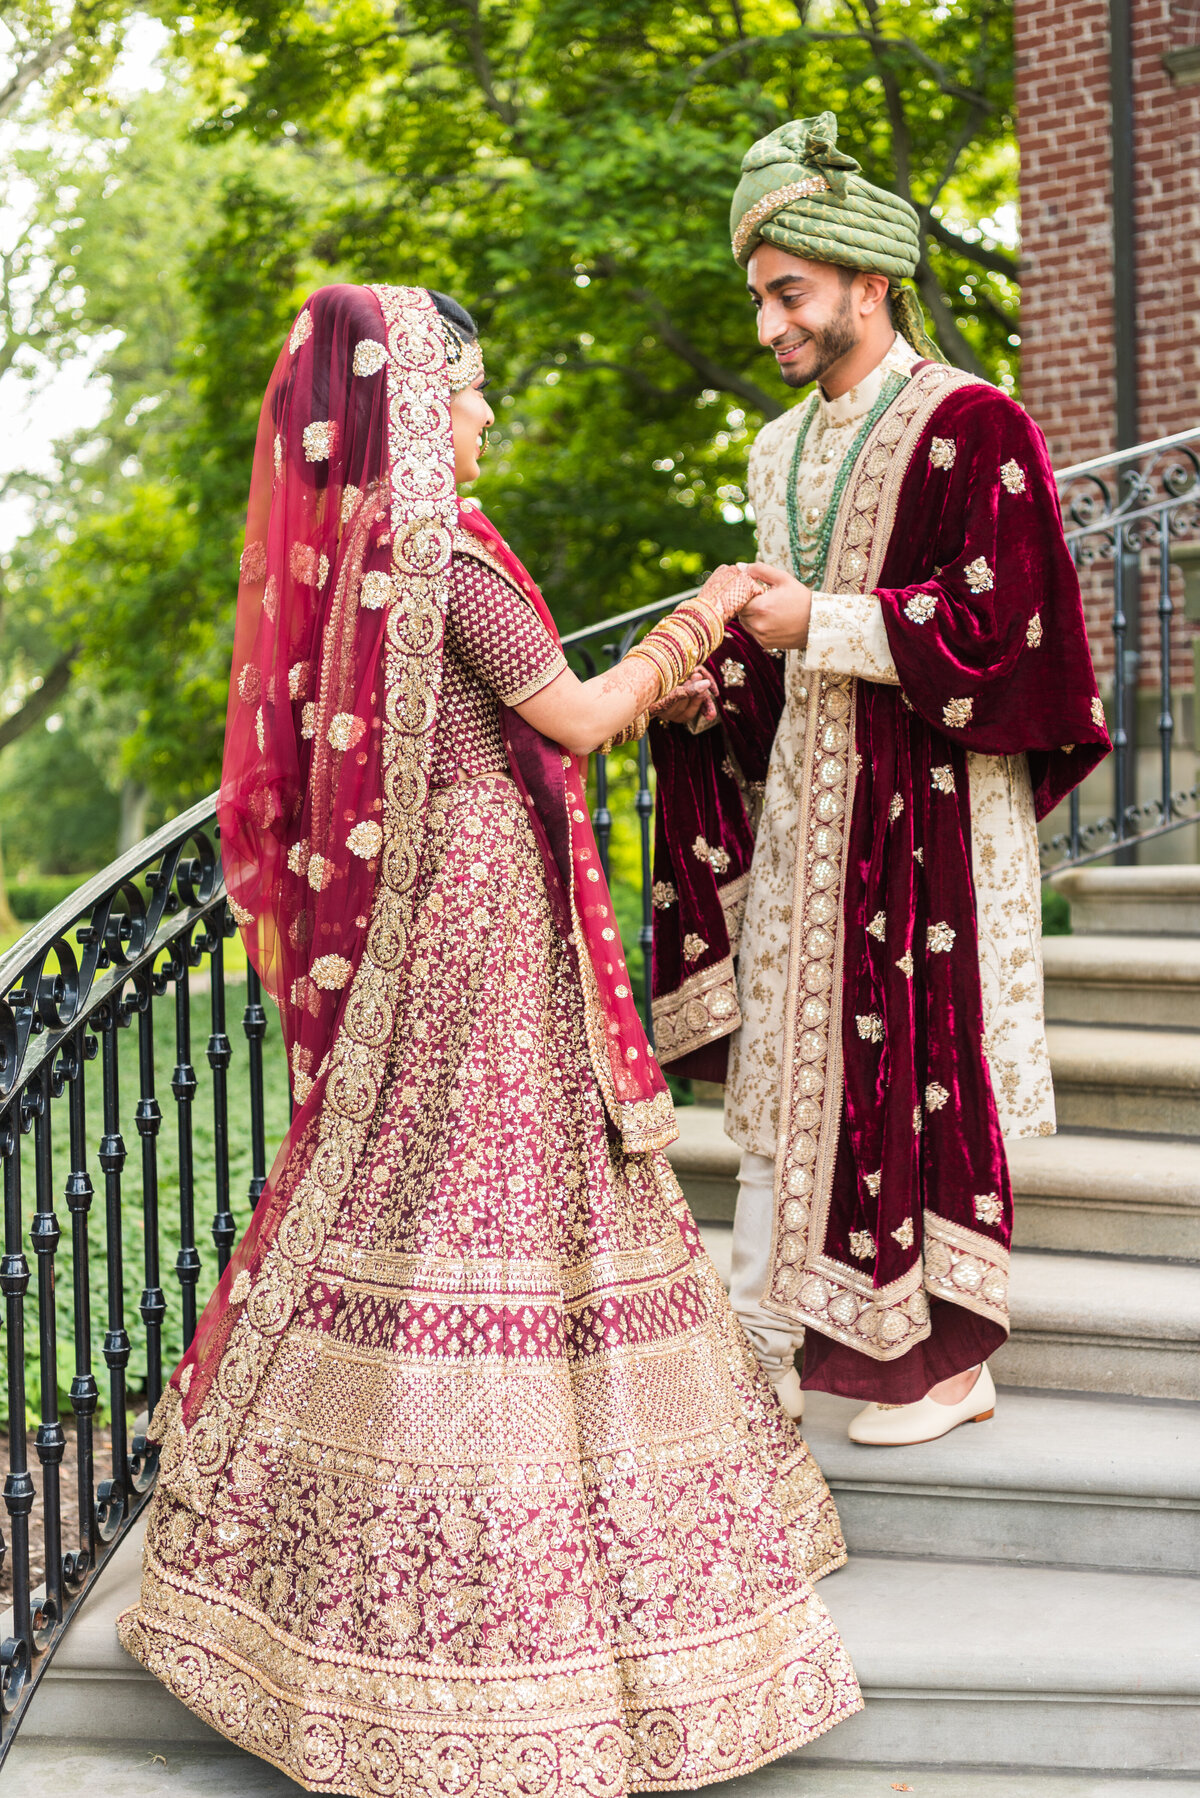 maha_studios_wedding_photography_chicago_new_york_california_sophisticated_and_vibrant_photography_honoring_modern_south_asian_and_multicultural_weddings10